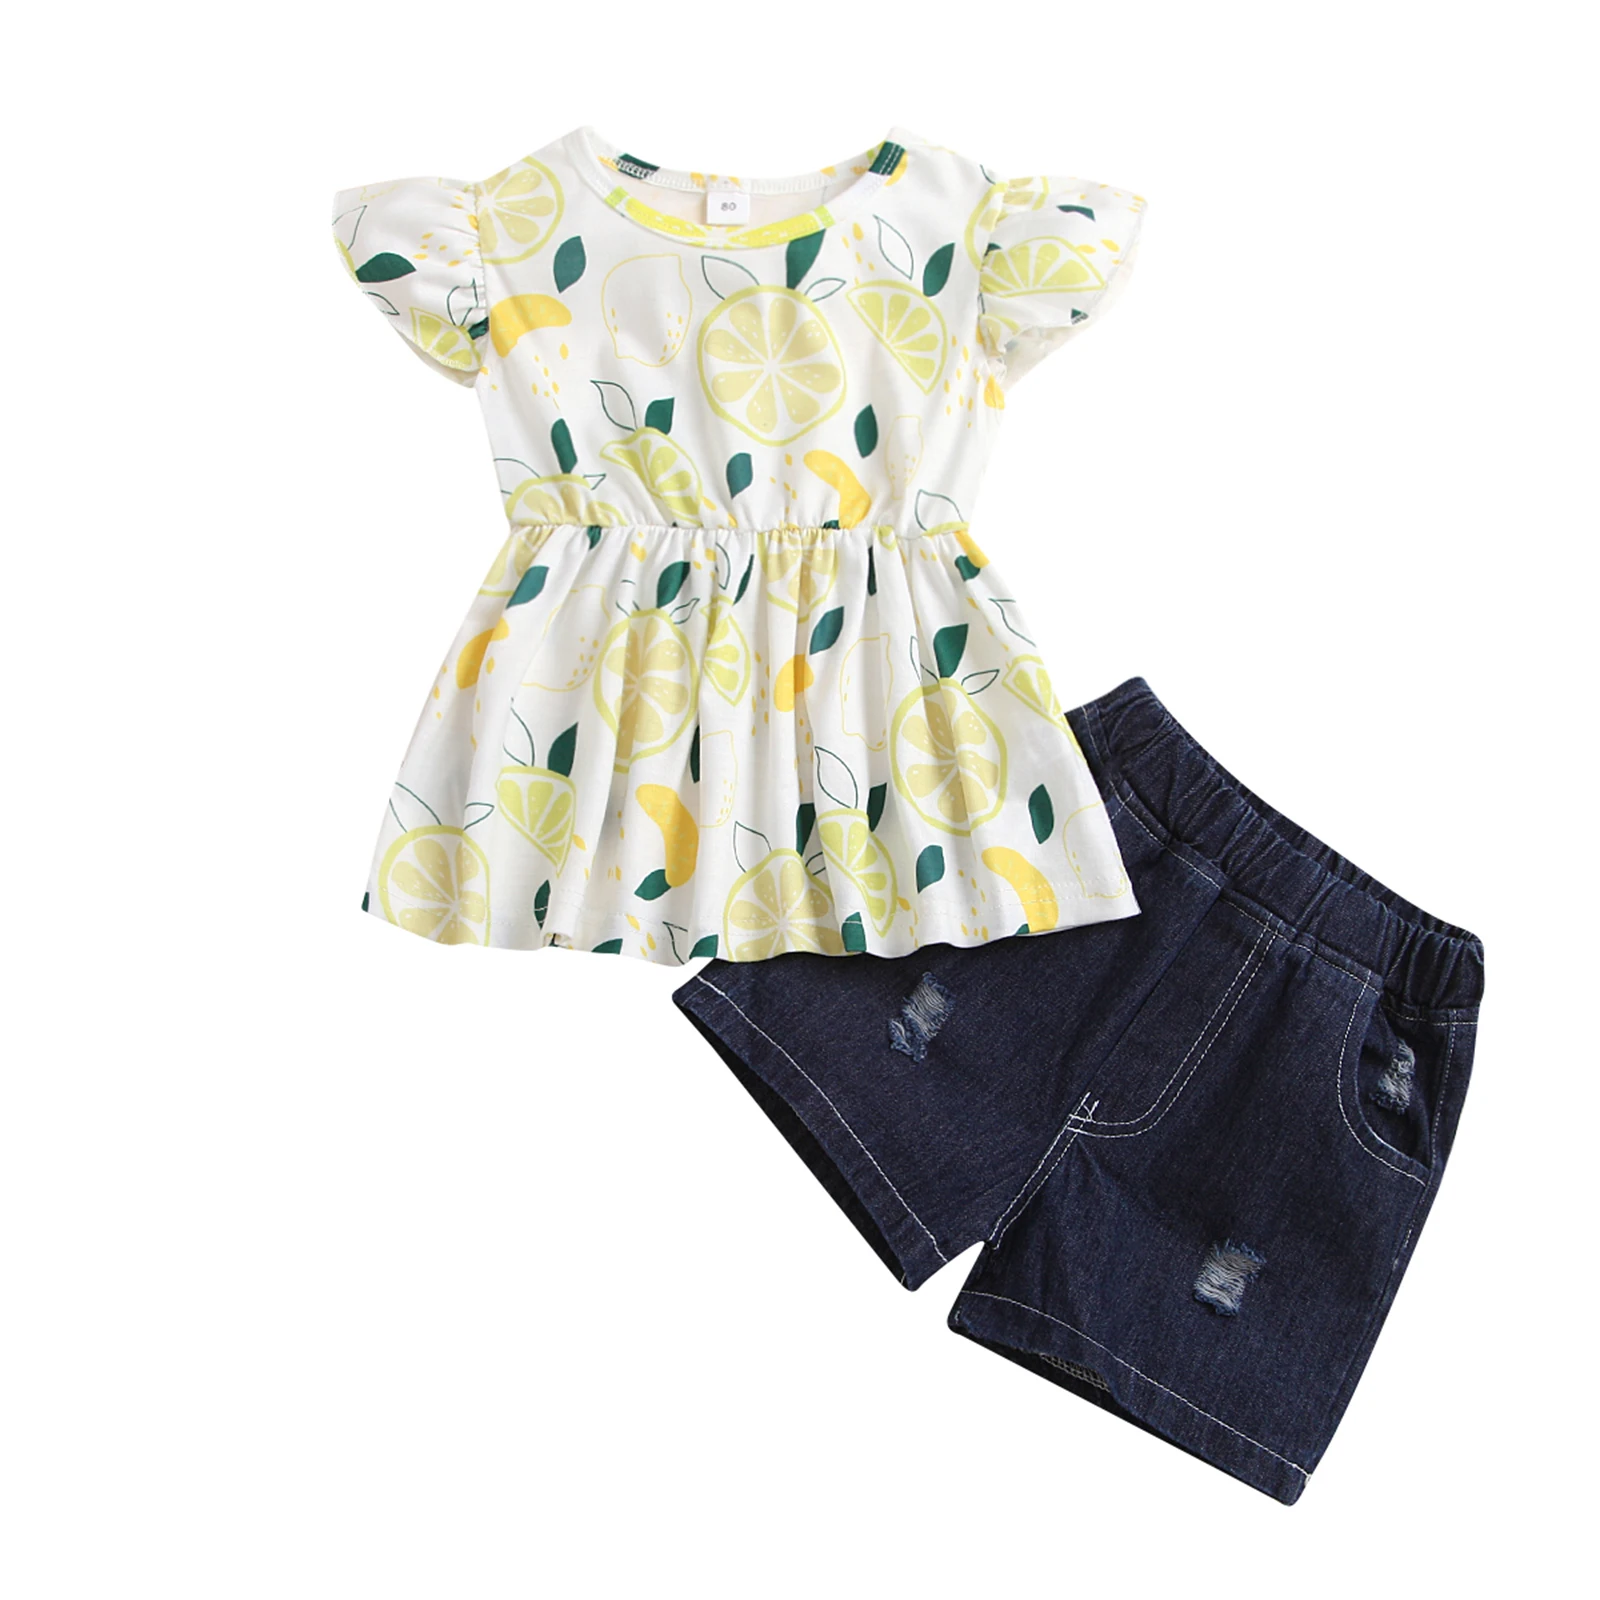 

2Pcs Fashion Little Girls Outfit Summer 2021 Children Casual Lemon Printing Fly Sleeve Round Collar Top + Solid Color Shorts Set